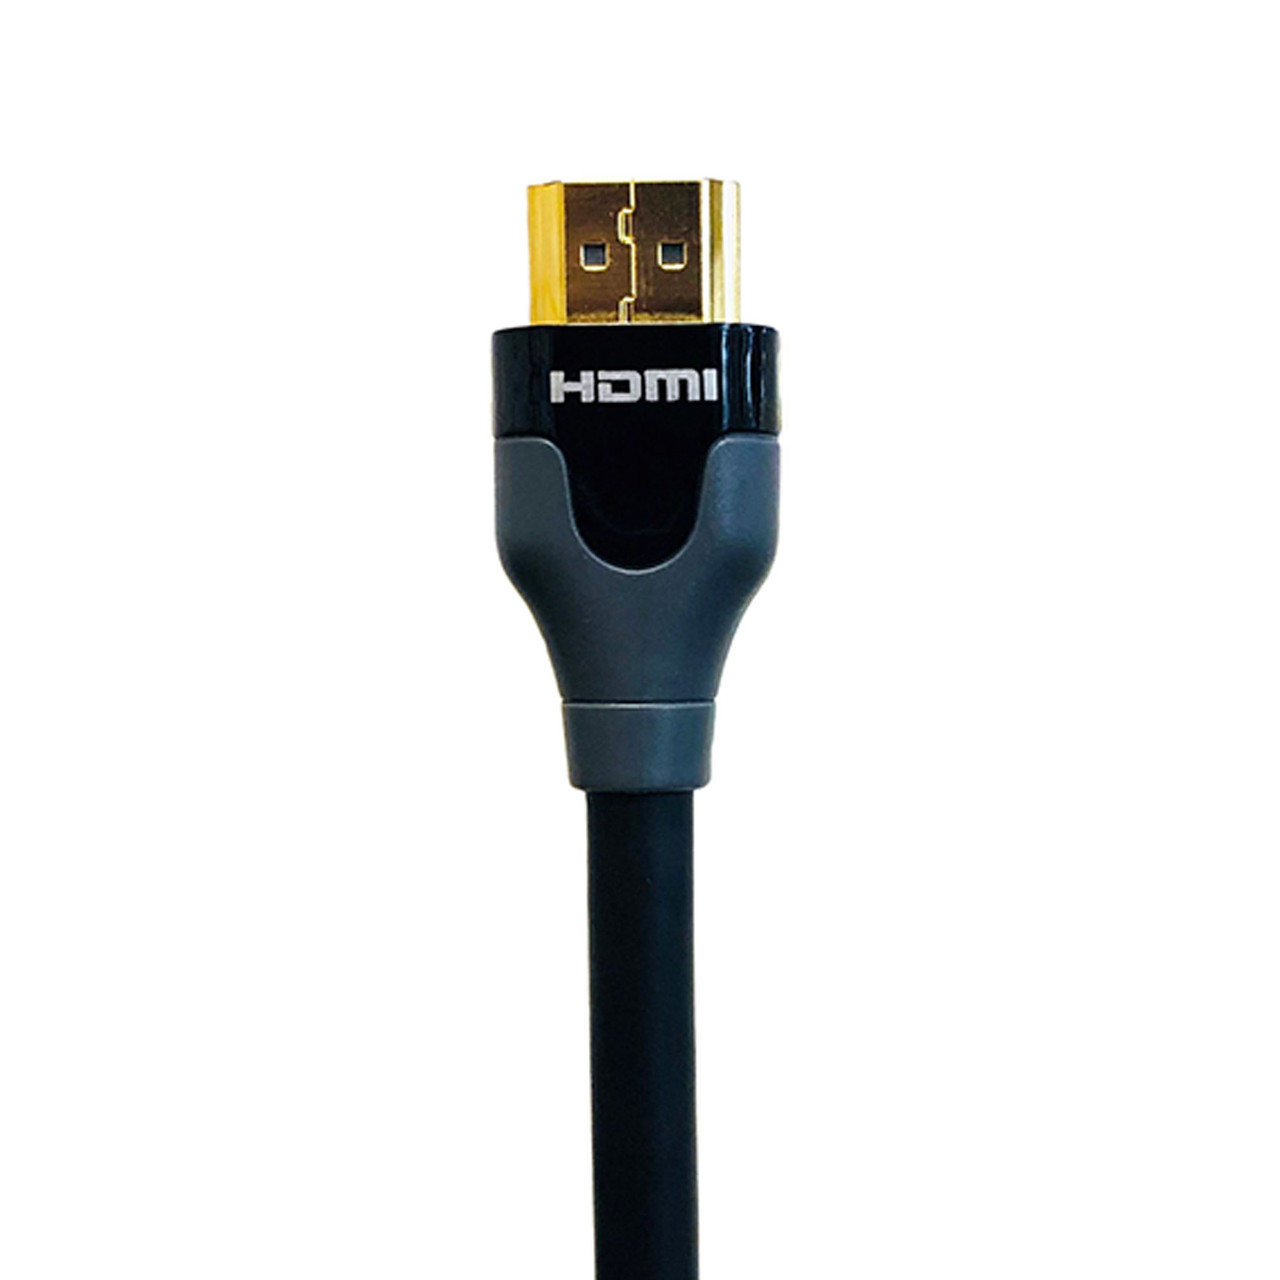 Tributaries UHD48-050D UHD48 Series 48G HDMI Cable, Dynamic HDR, resolutions of 8K60, 4K120 and 10K Creative Audio